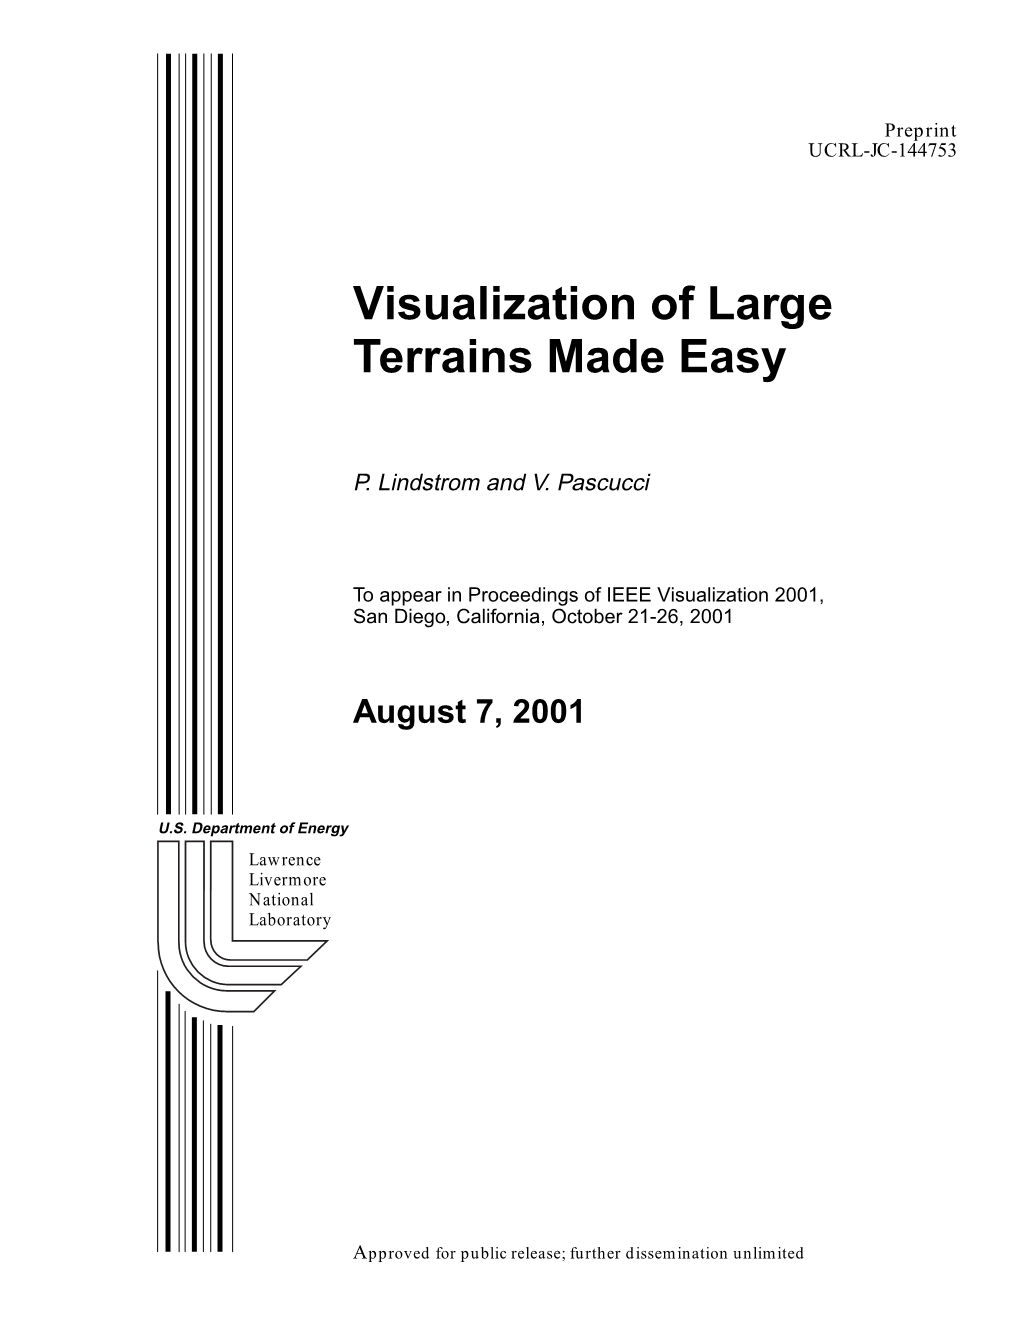 Visualization of Large Terrains Made Easy